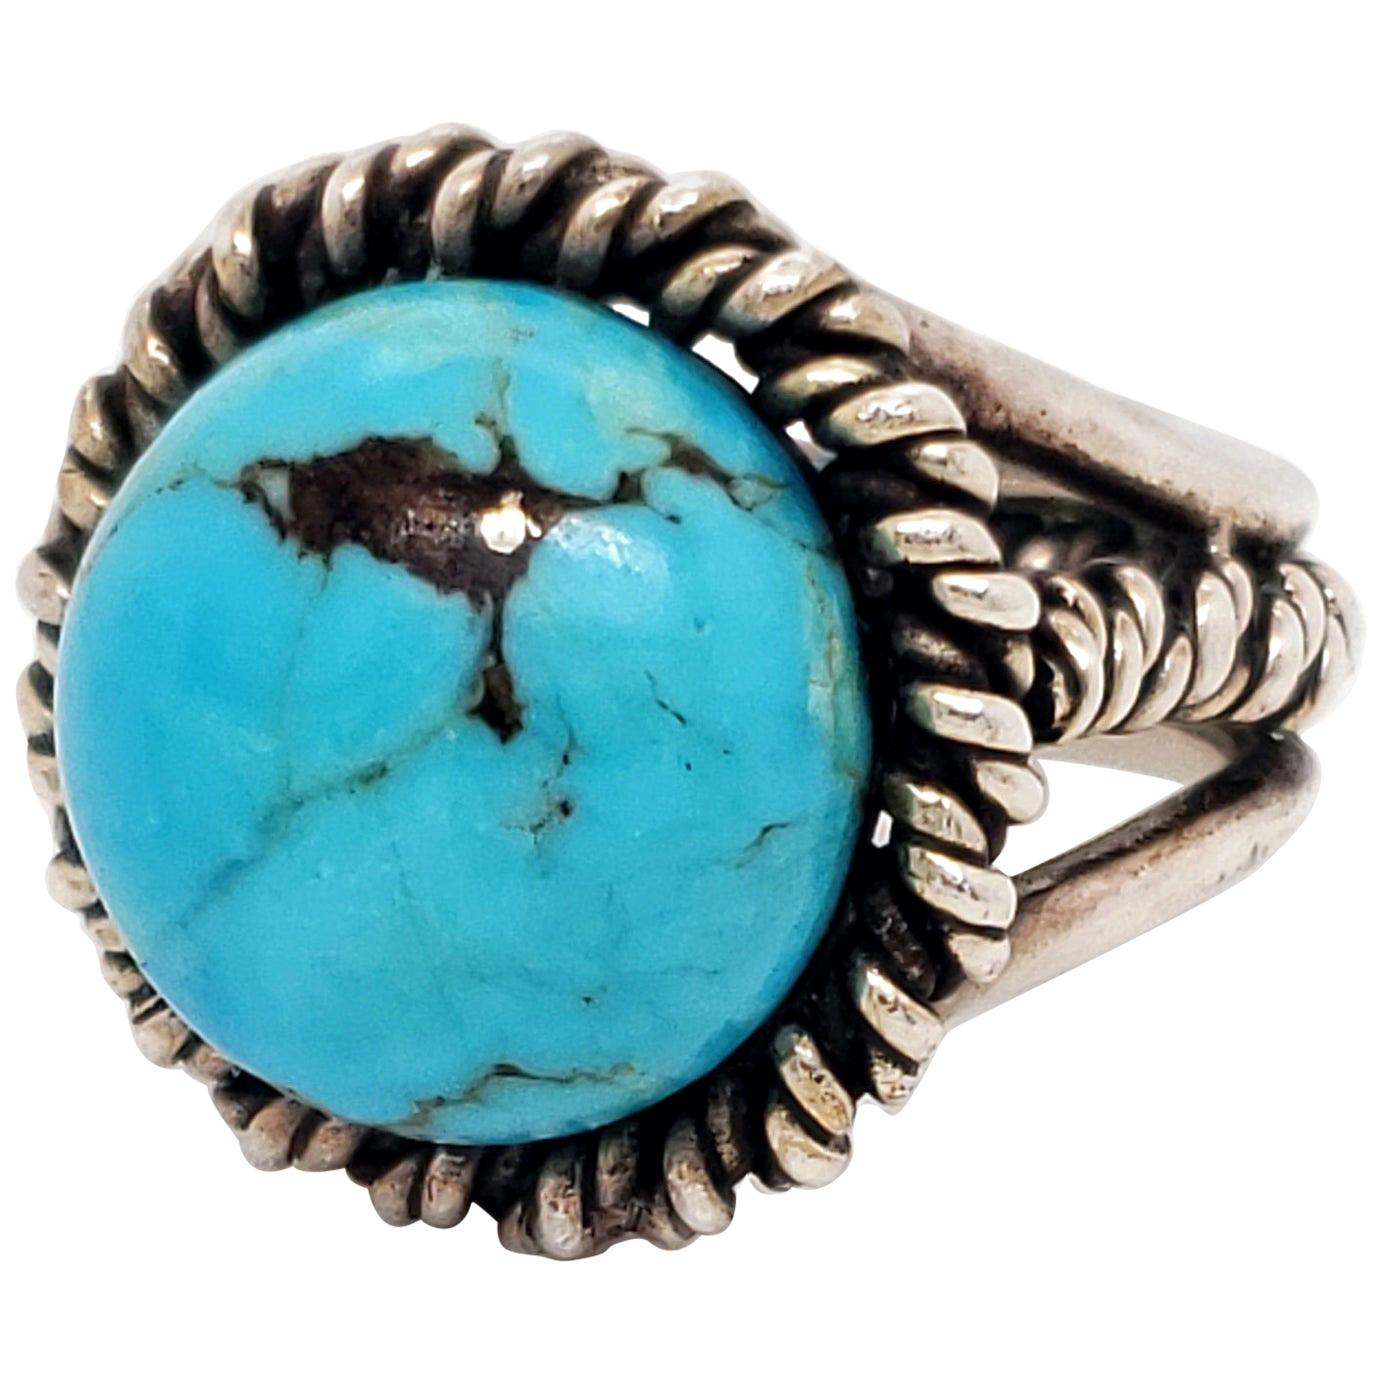 1960s Fred Skagg Handmade Sterling Silver and Turquoise Ring